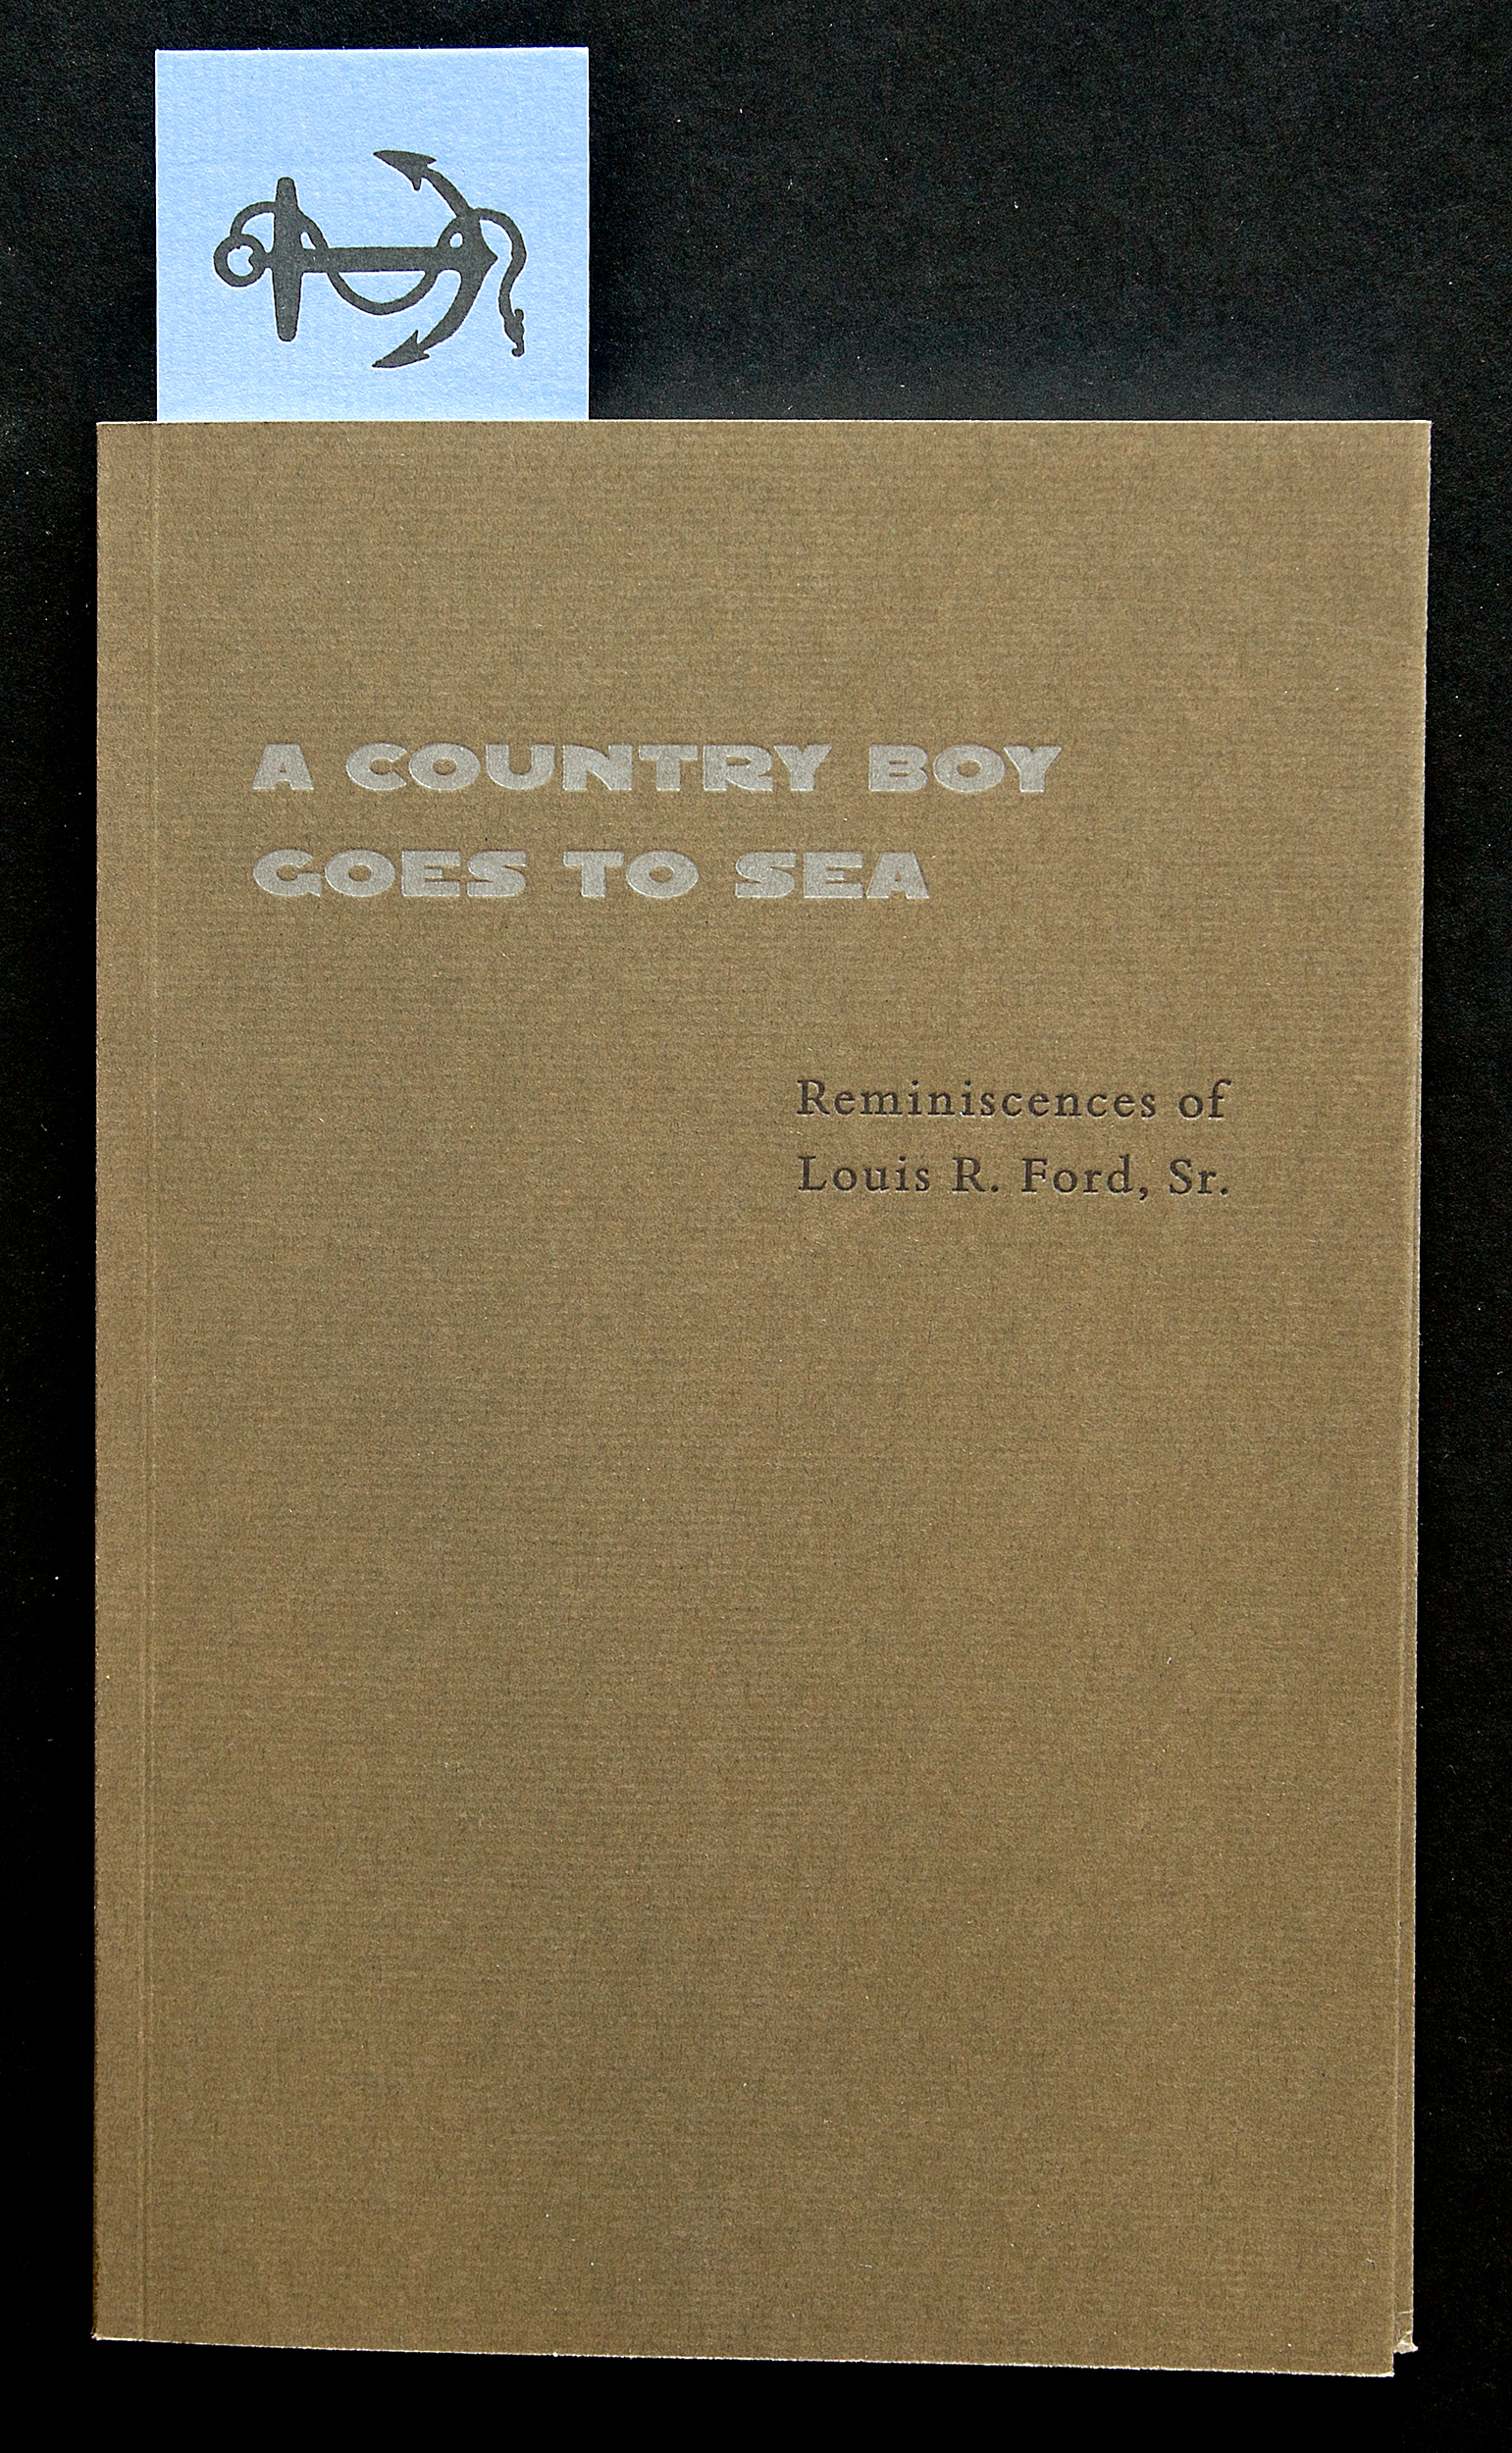 CountryBoy.cover.withbookmark.jpg